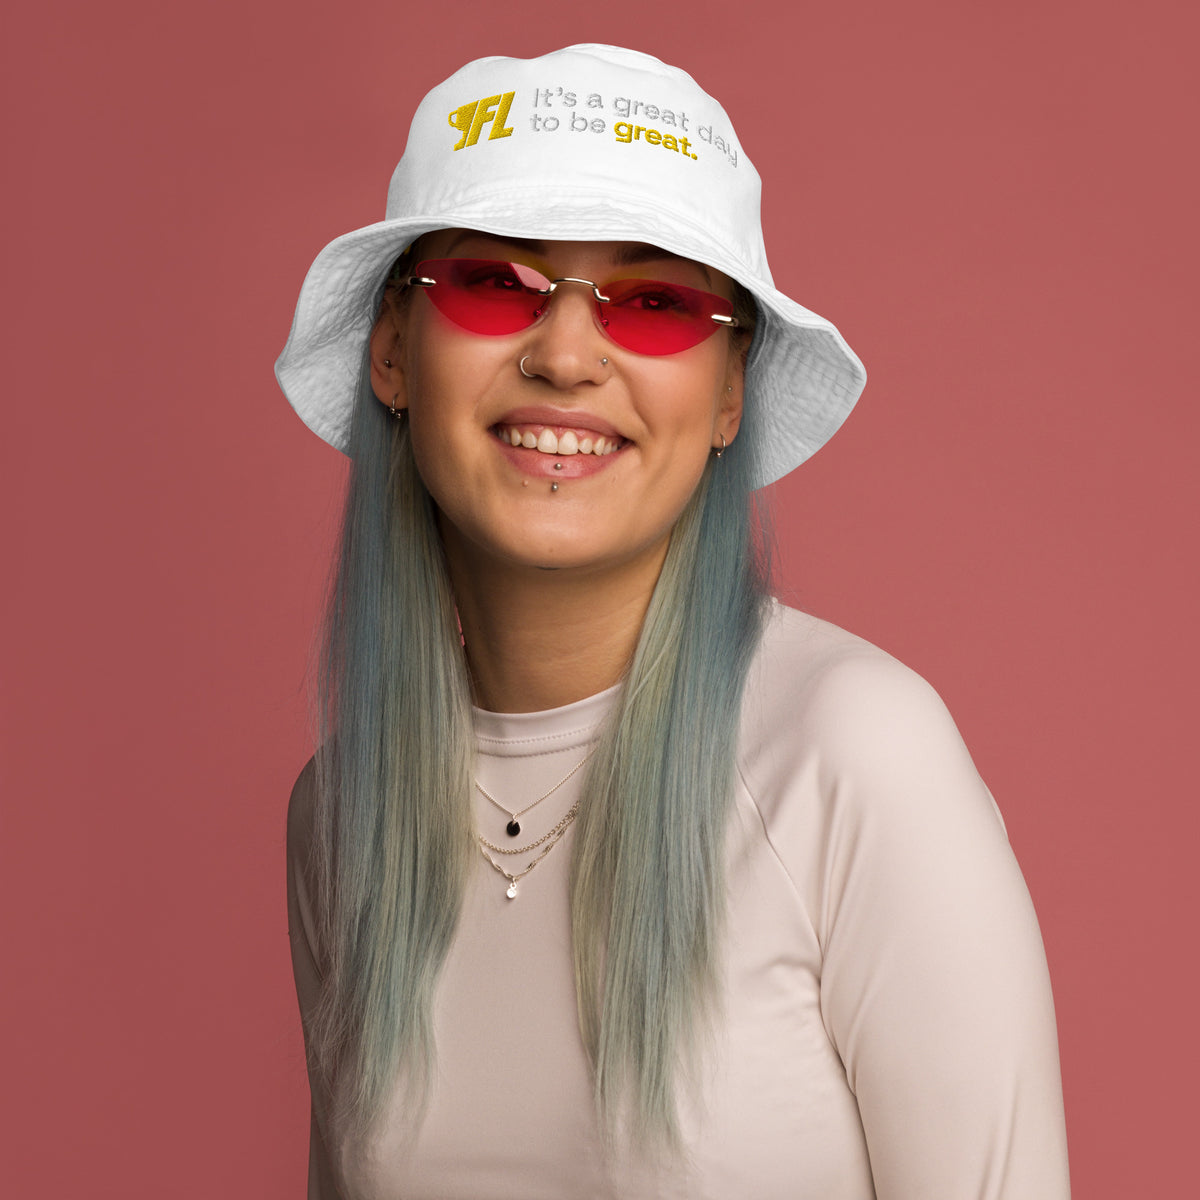 FL2024 "It's A Great Day To Be Great" Embroidered Bucket Hat